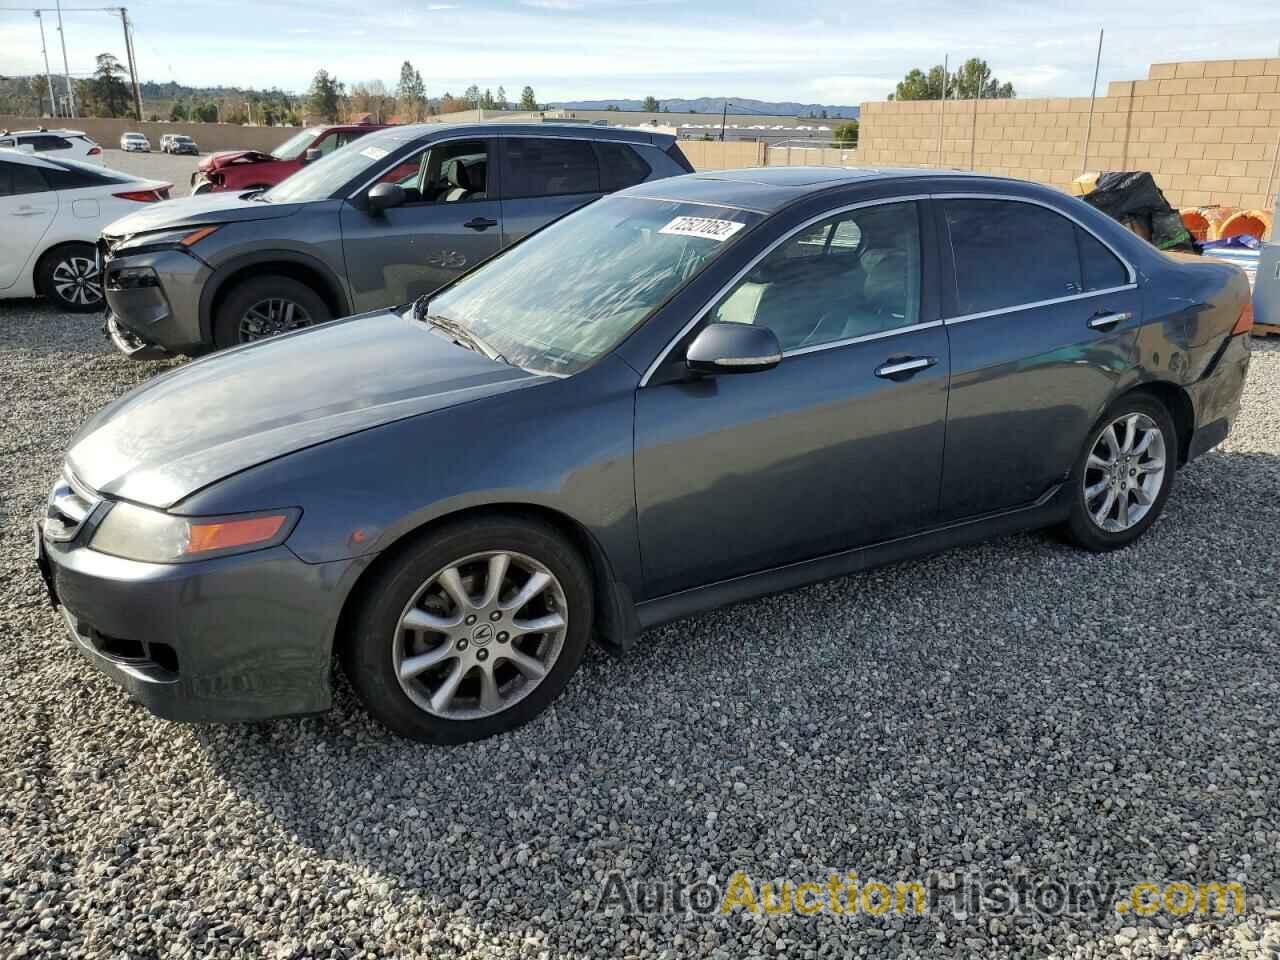 2008 ACURA TSX, JH4CL96988C013294